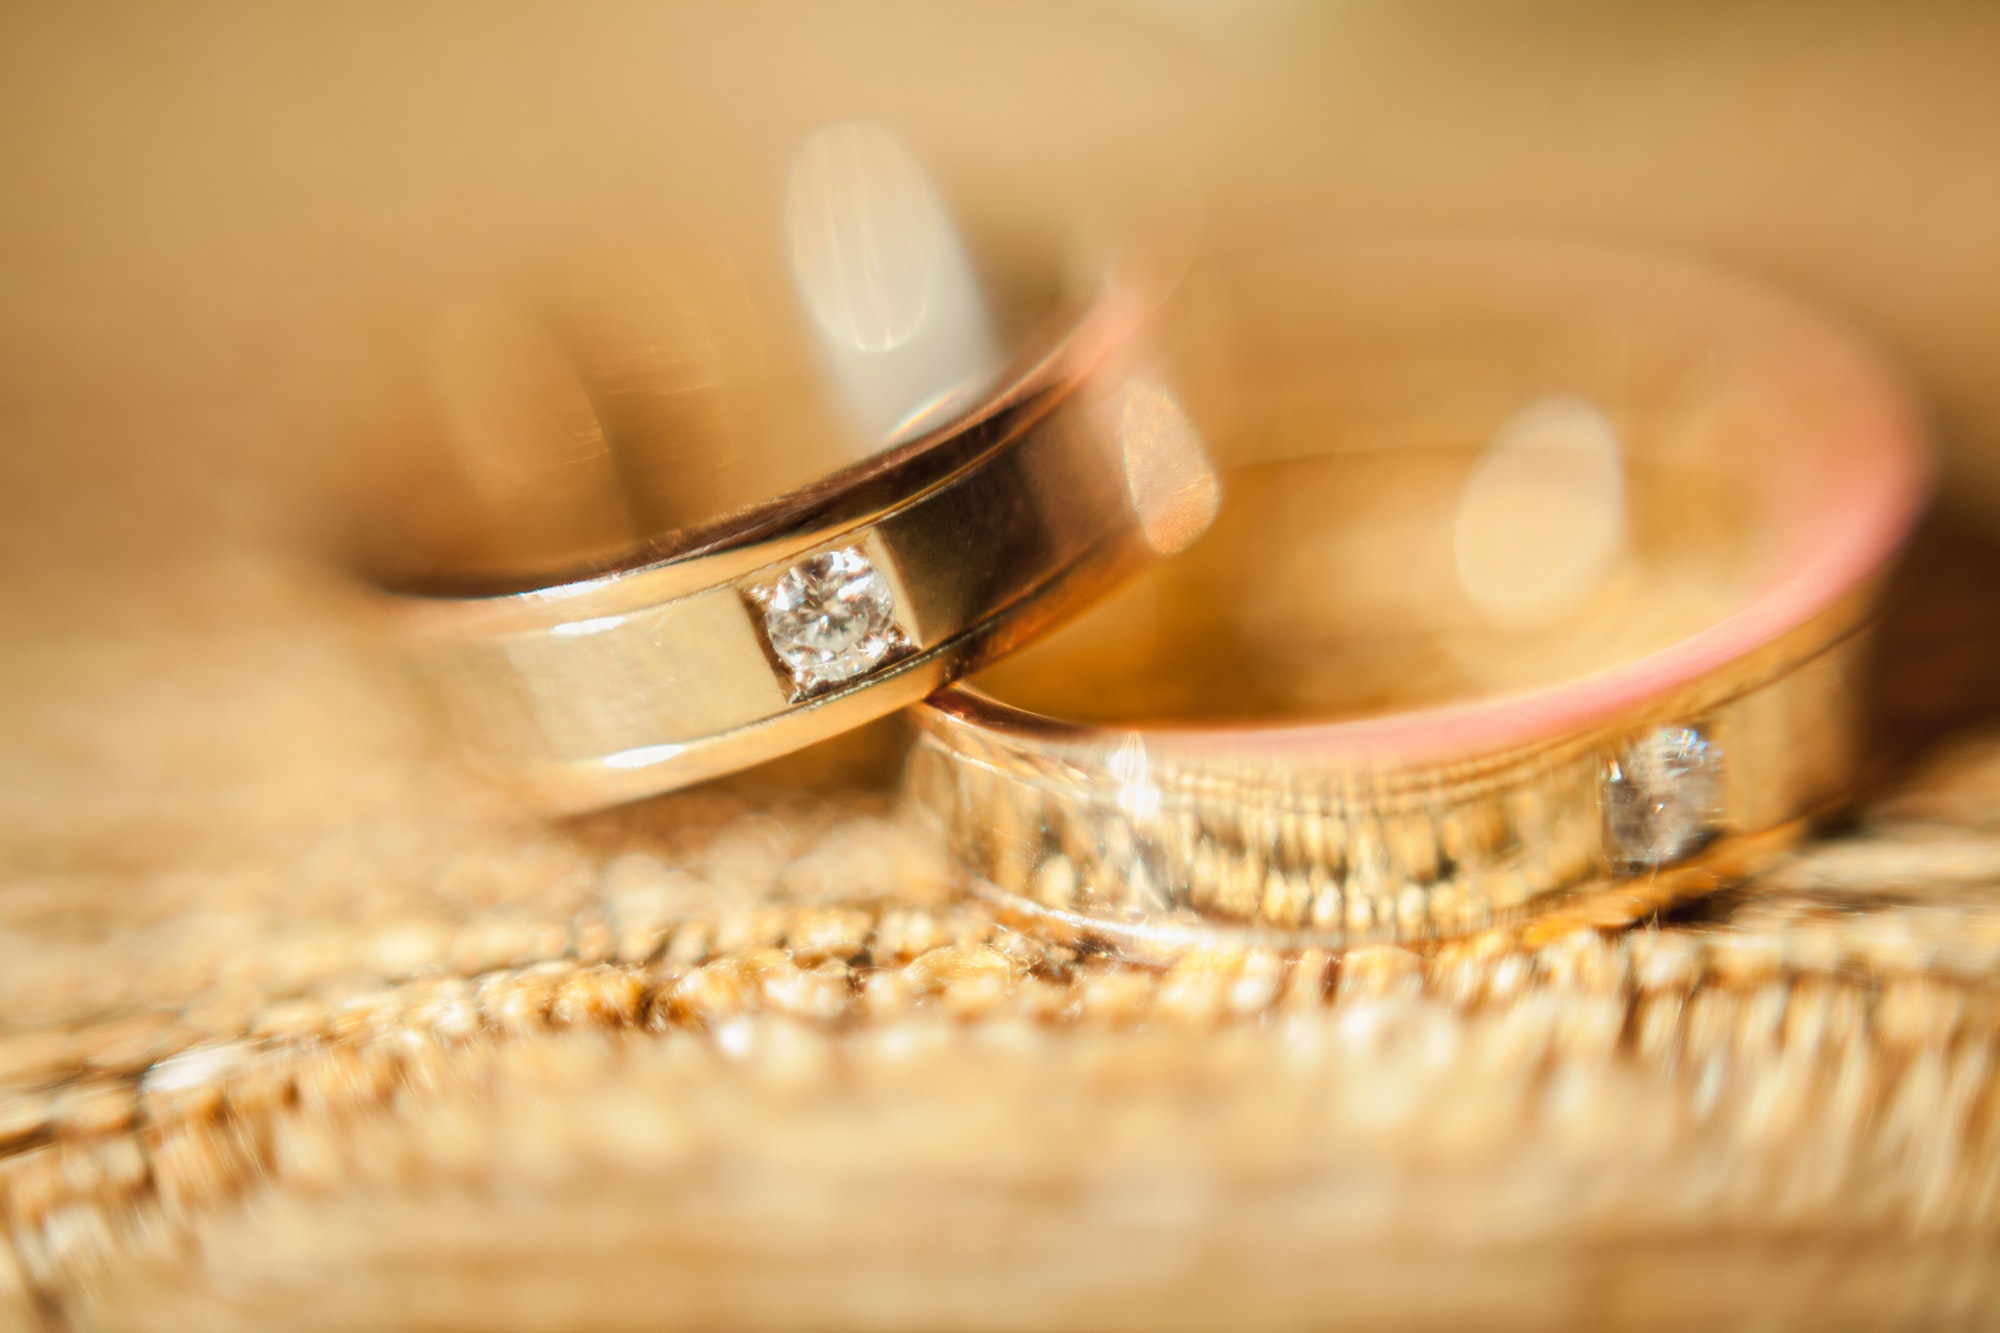 The wedding rings close up